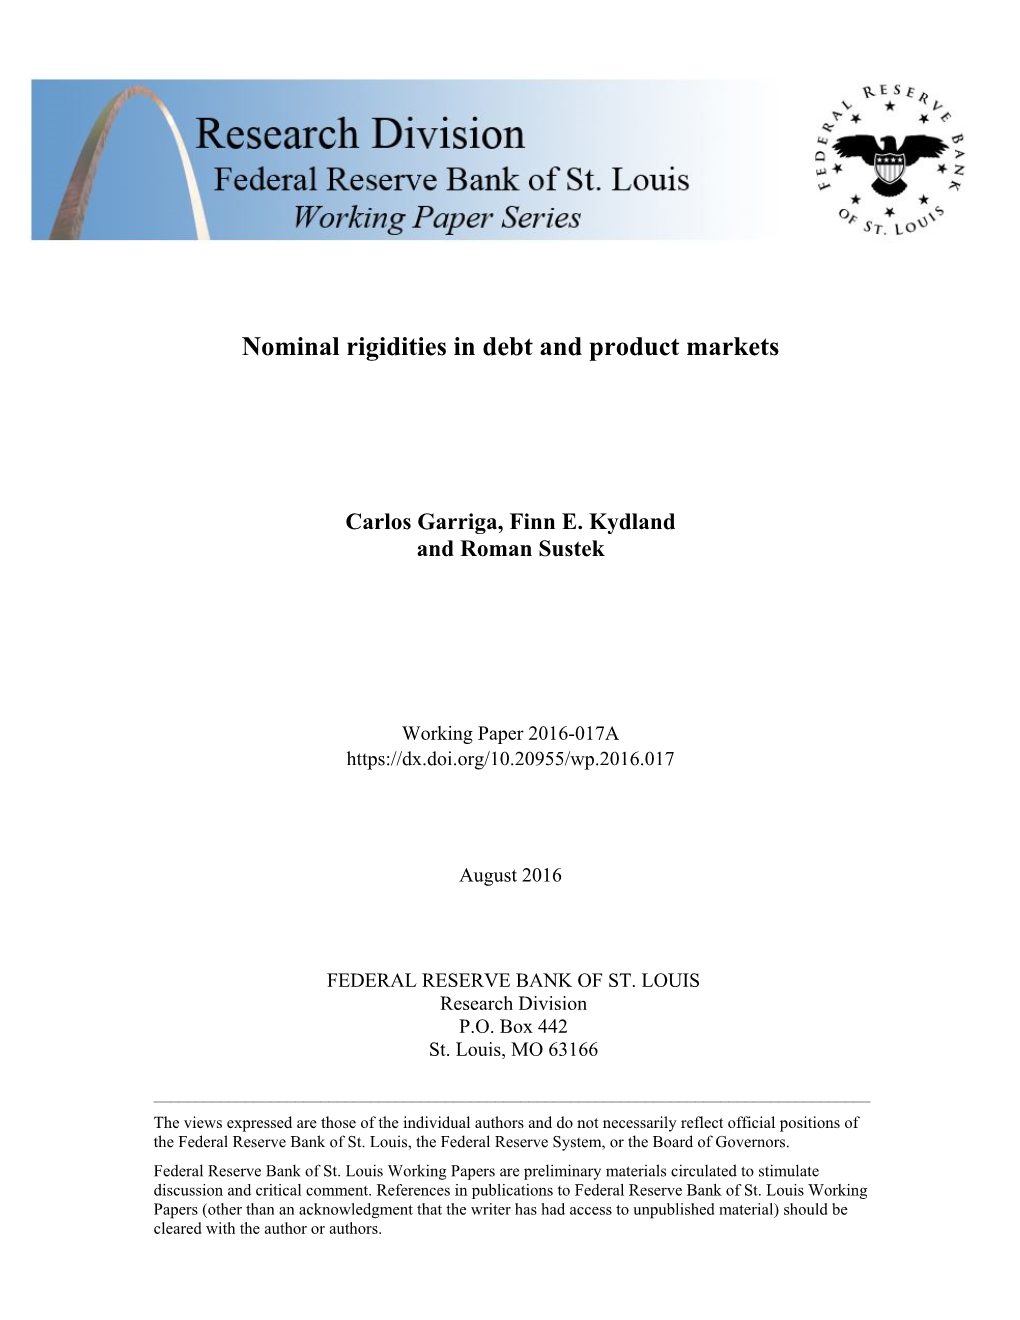 Nominal Rigidities in Debt and Product Markets